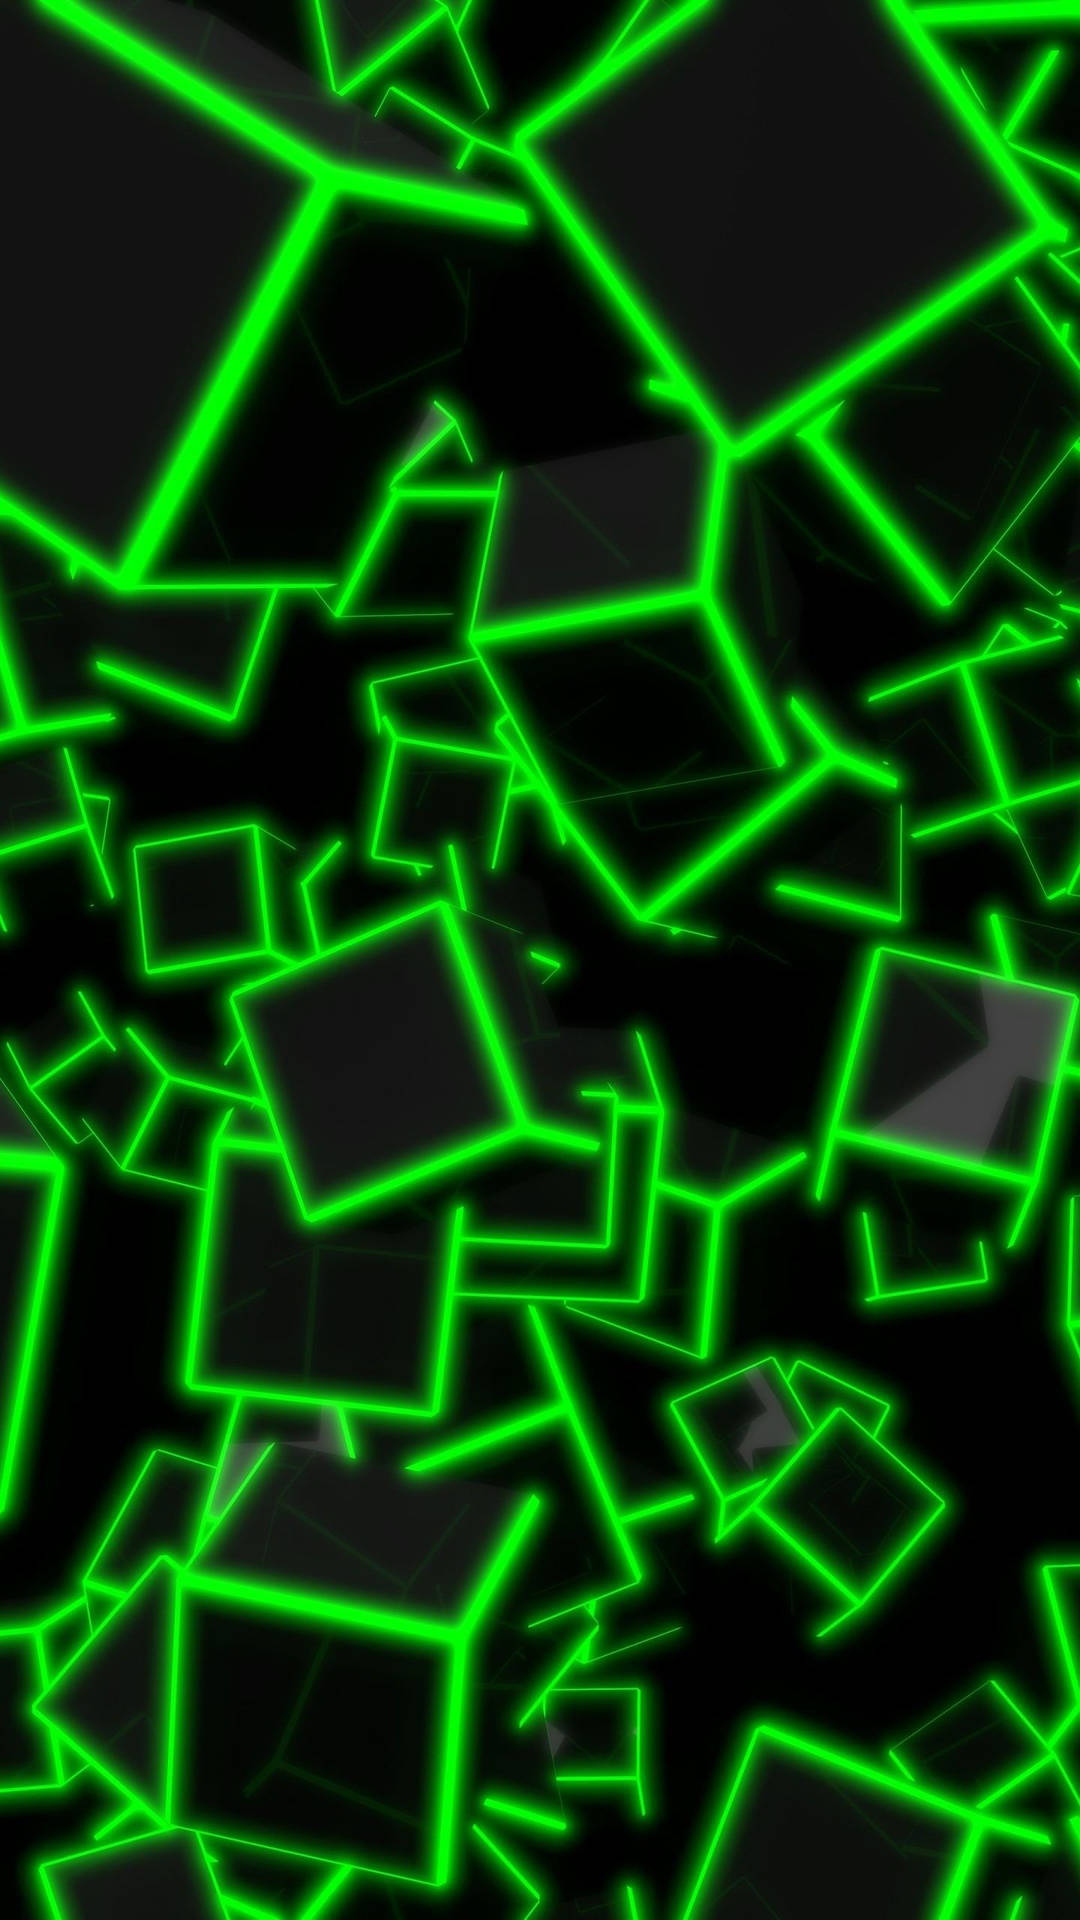 Overlapping Cool Green Squares Wallpaper